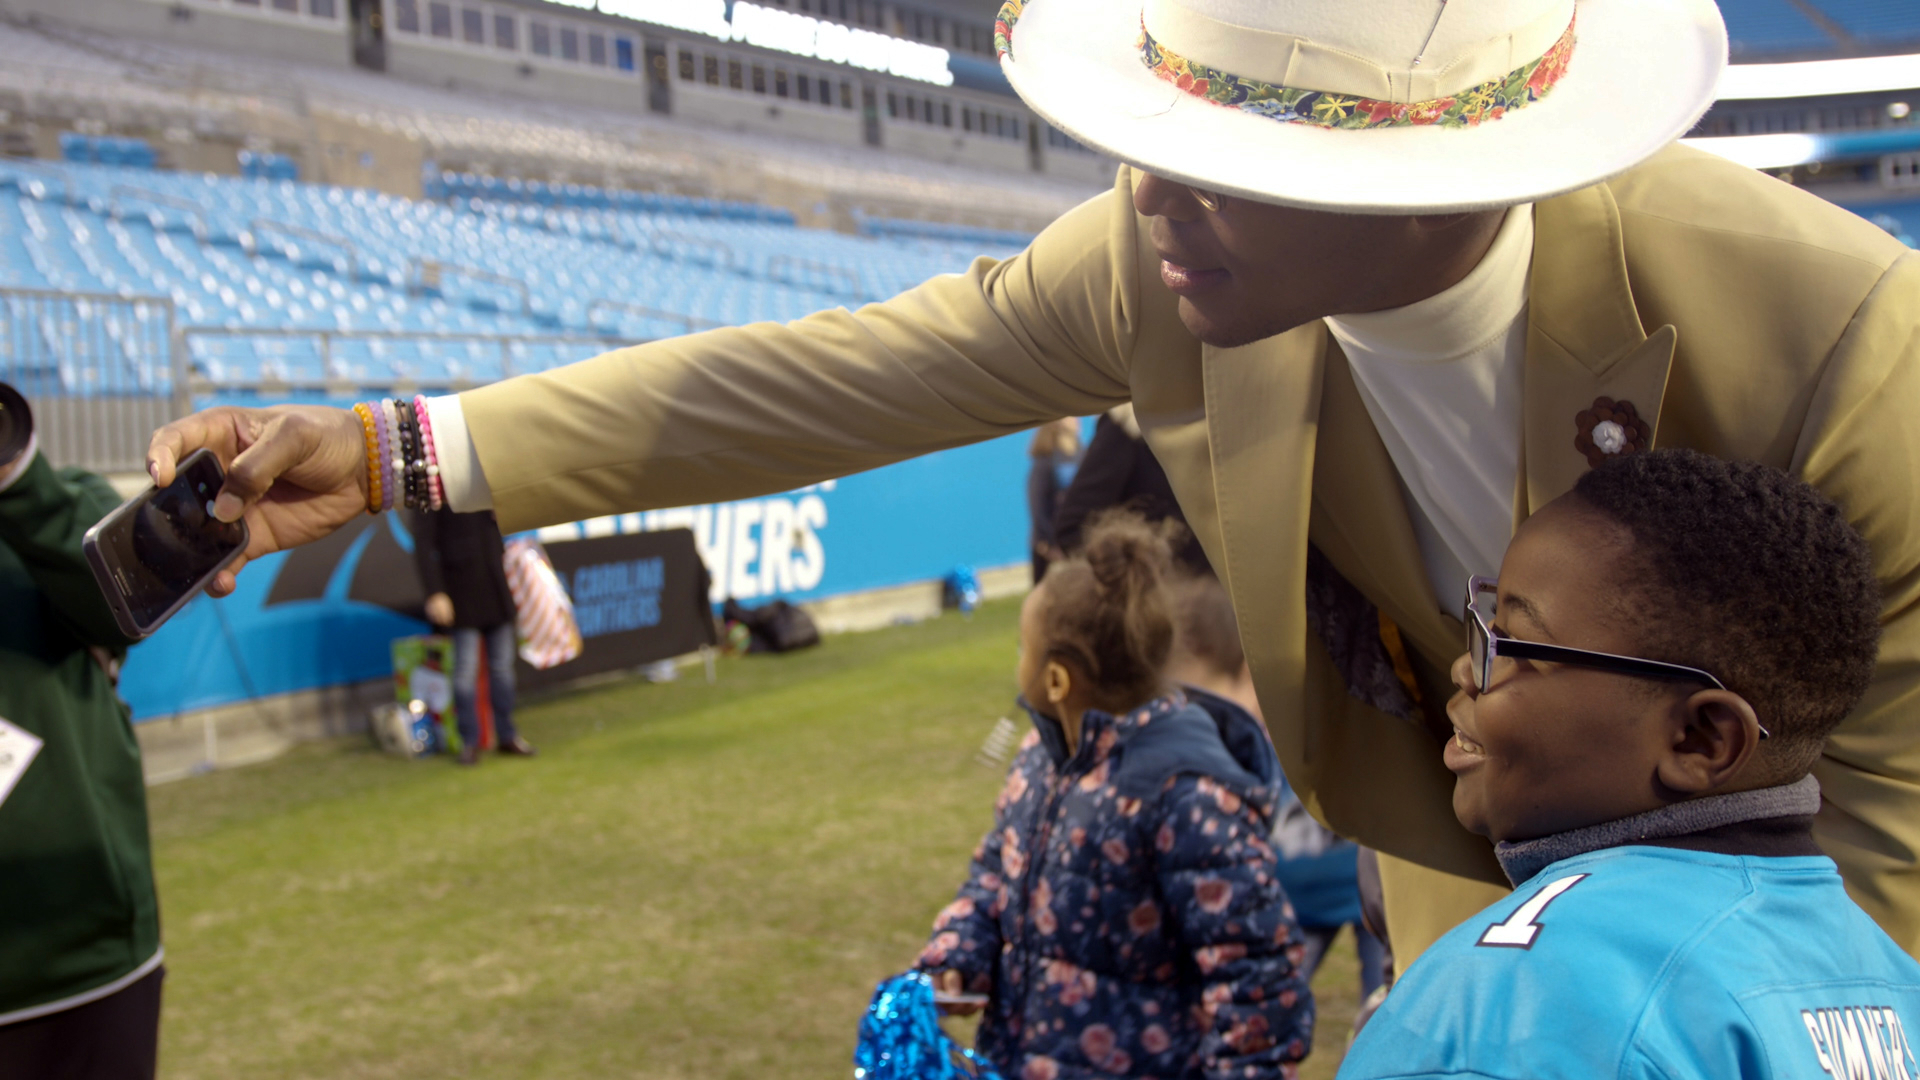 For a few hours, a dozen patients at Atrium Health’s Levine Children’s Hospital and their families were able to forget about their worries and just enjoy a football game as special guests of Carolina Panthers’ quarterback Cam Newton as part of his foundation’s “Christmas with Cam” event. 